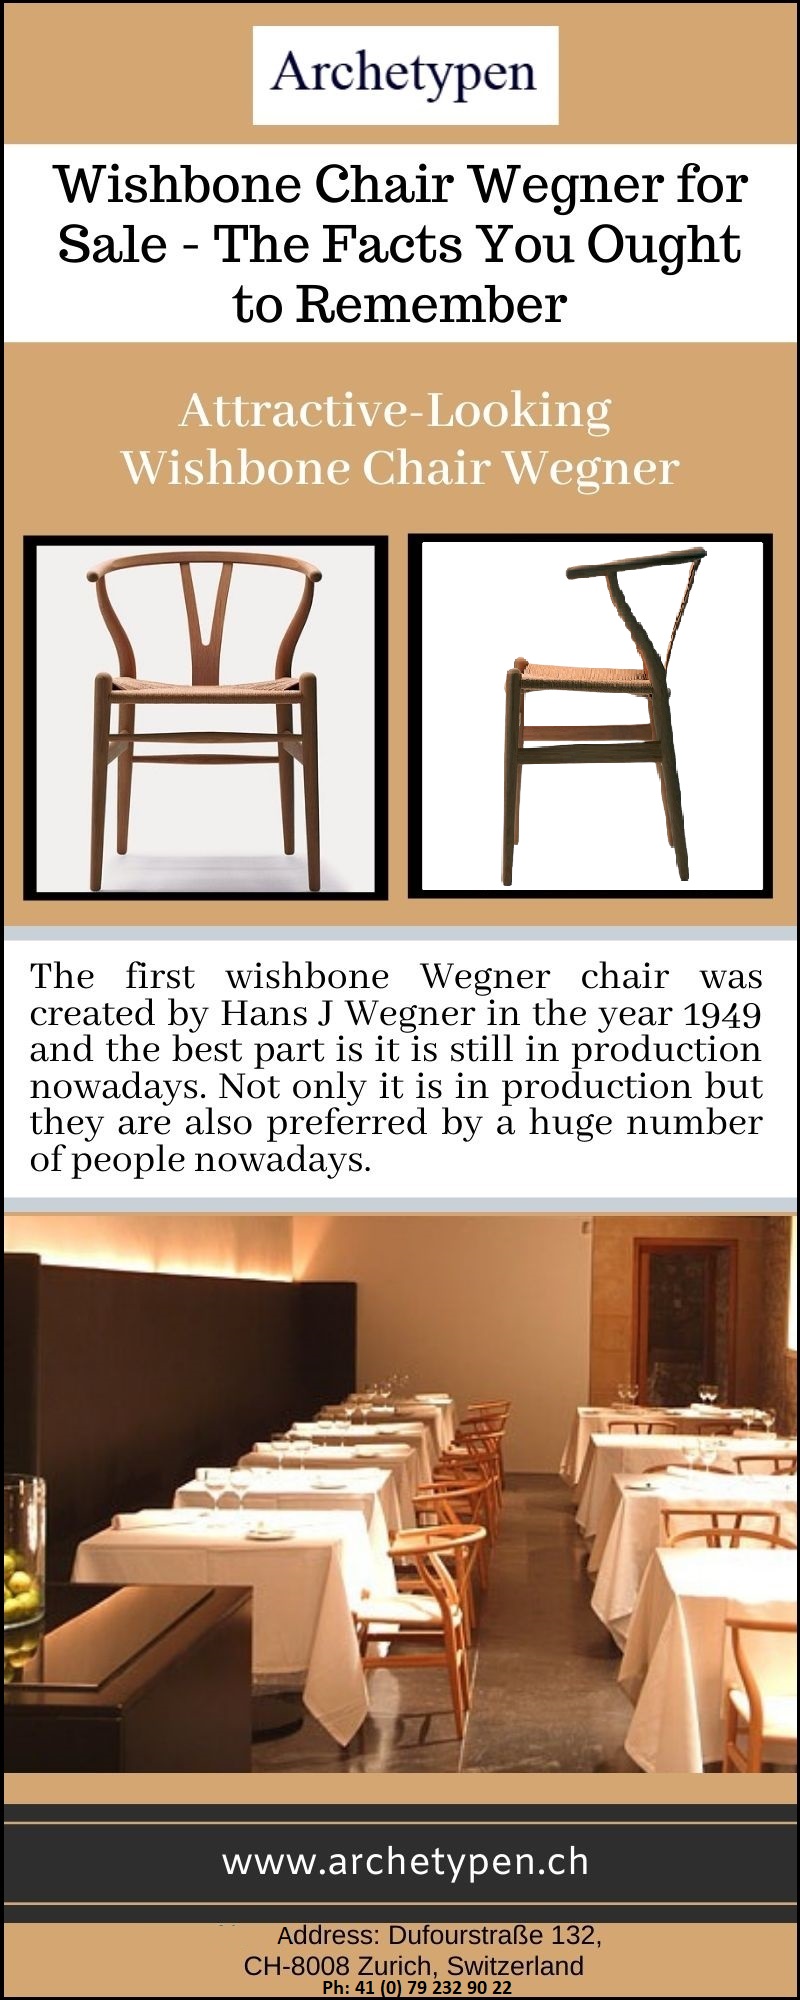 Wishbone Chair Wegner for Sale - The Facts You Ought to Remember.jpg Design is another important factor to consider while choosing the wishbone chair Wegner for sale. The unique feature of these designs is they are sleek in nature.
Visit- https://go2article.com/article/wishbone-chair-wegner-for-sale-the-facts-you-ought-to by archetypen